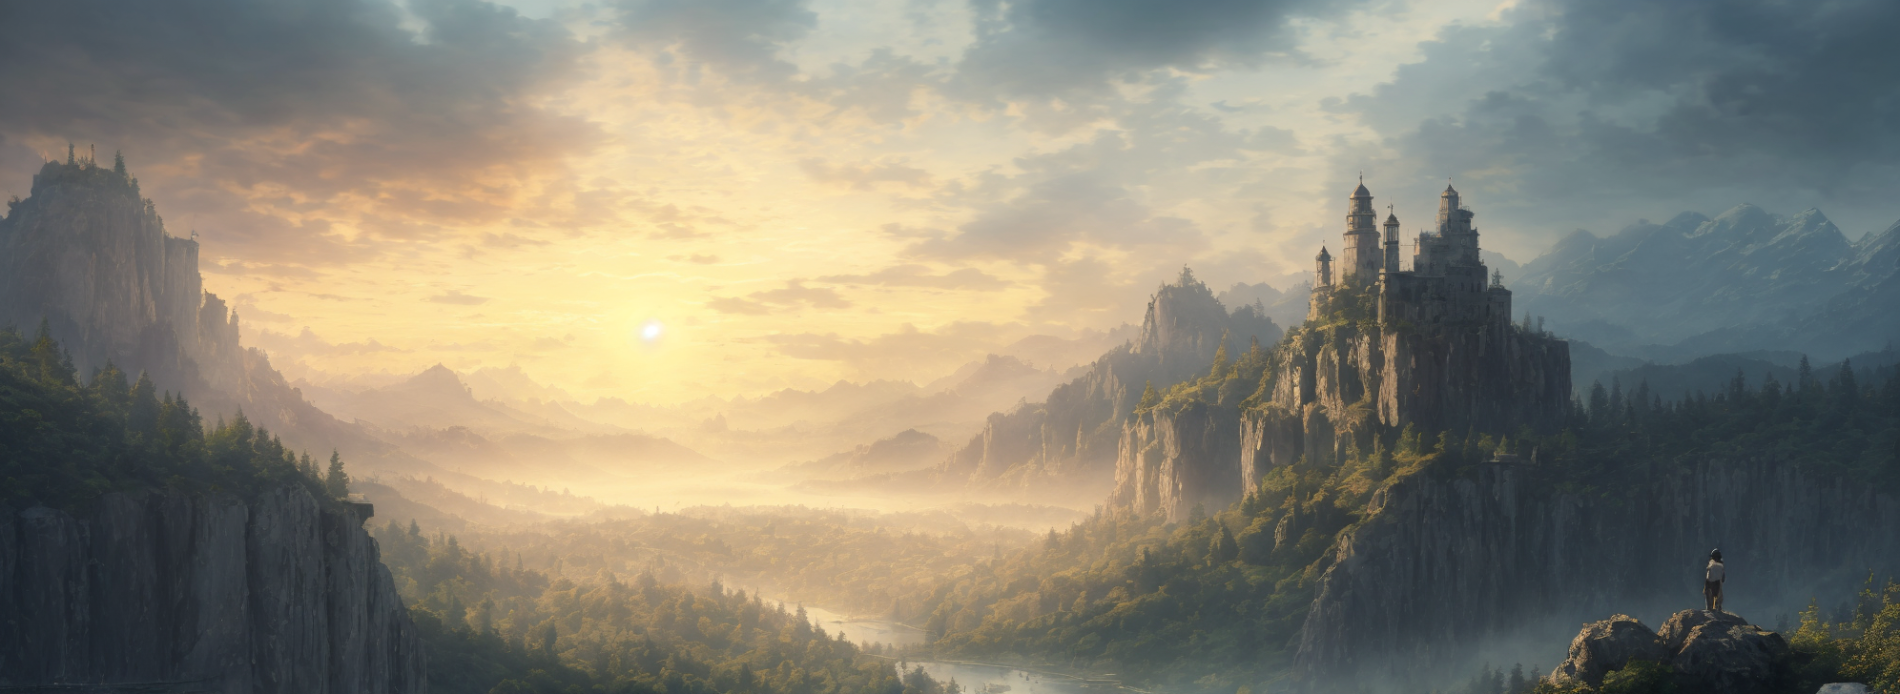 A valley at sunrise that is filled with a forest and a bit of fog. On the right cliff stands a castle. A person watches the scene in awe.